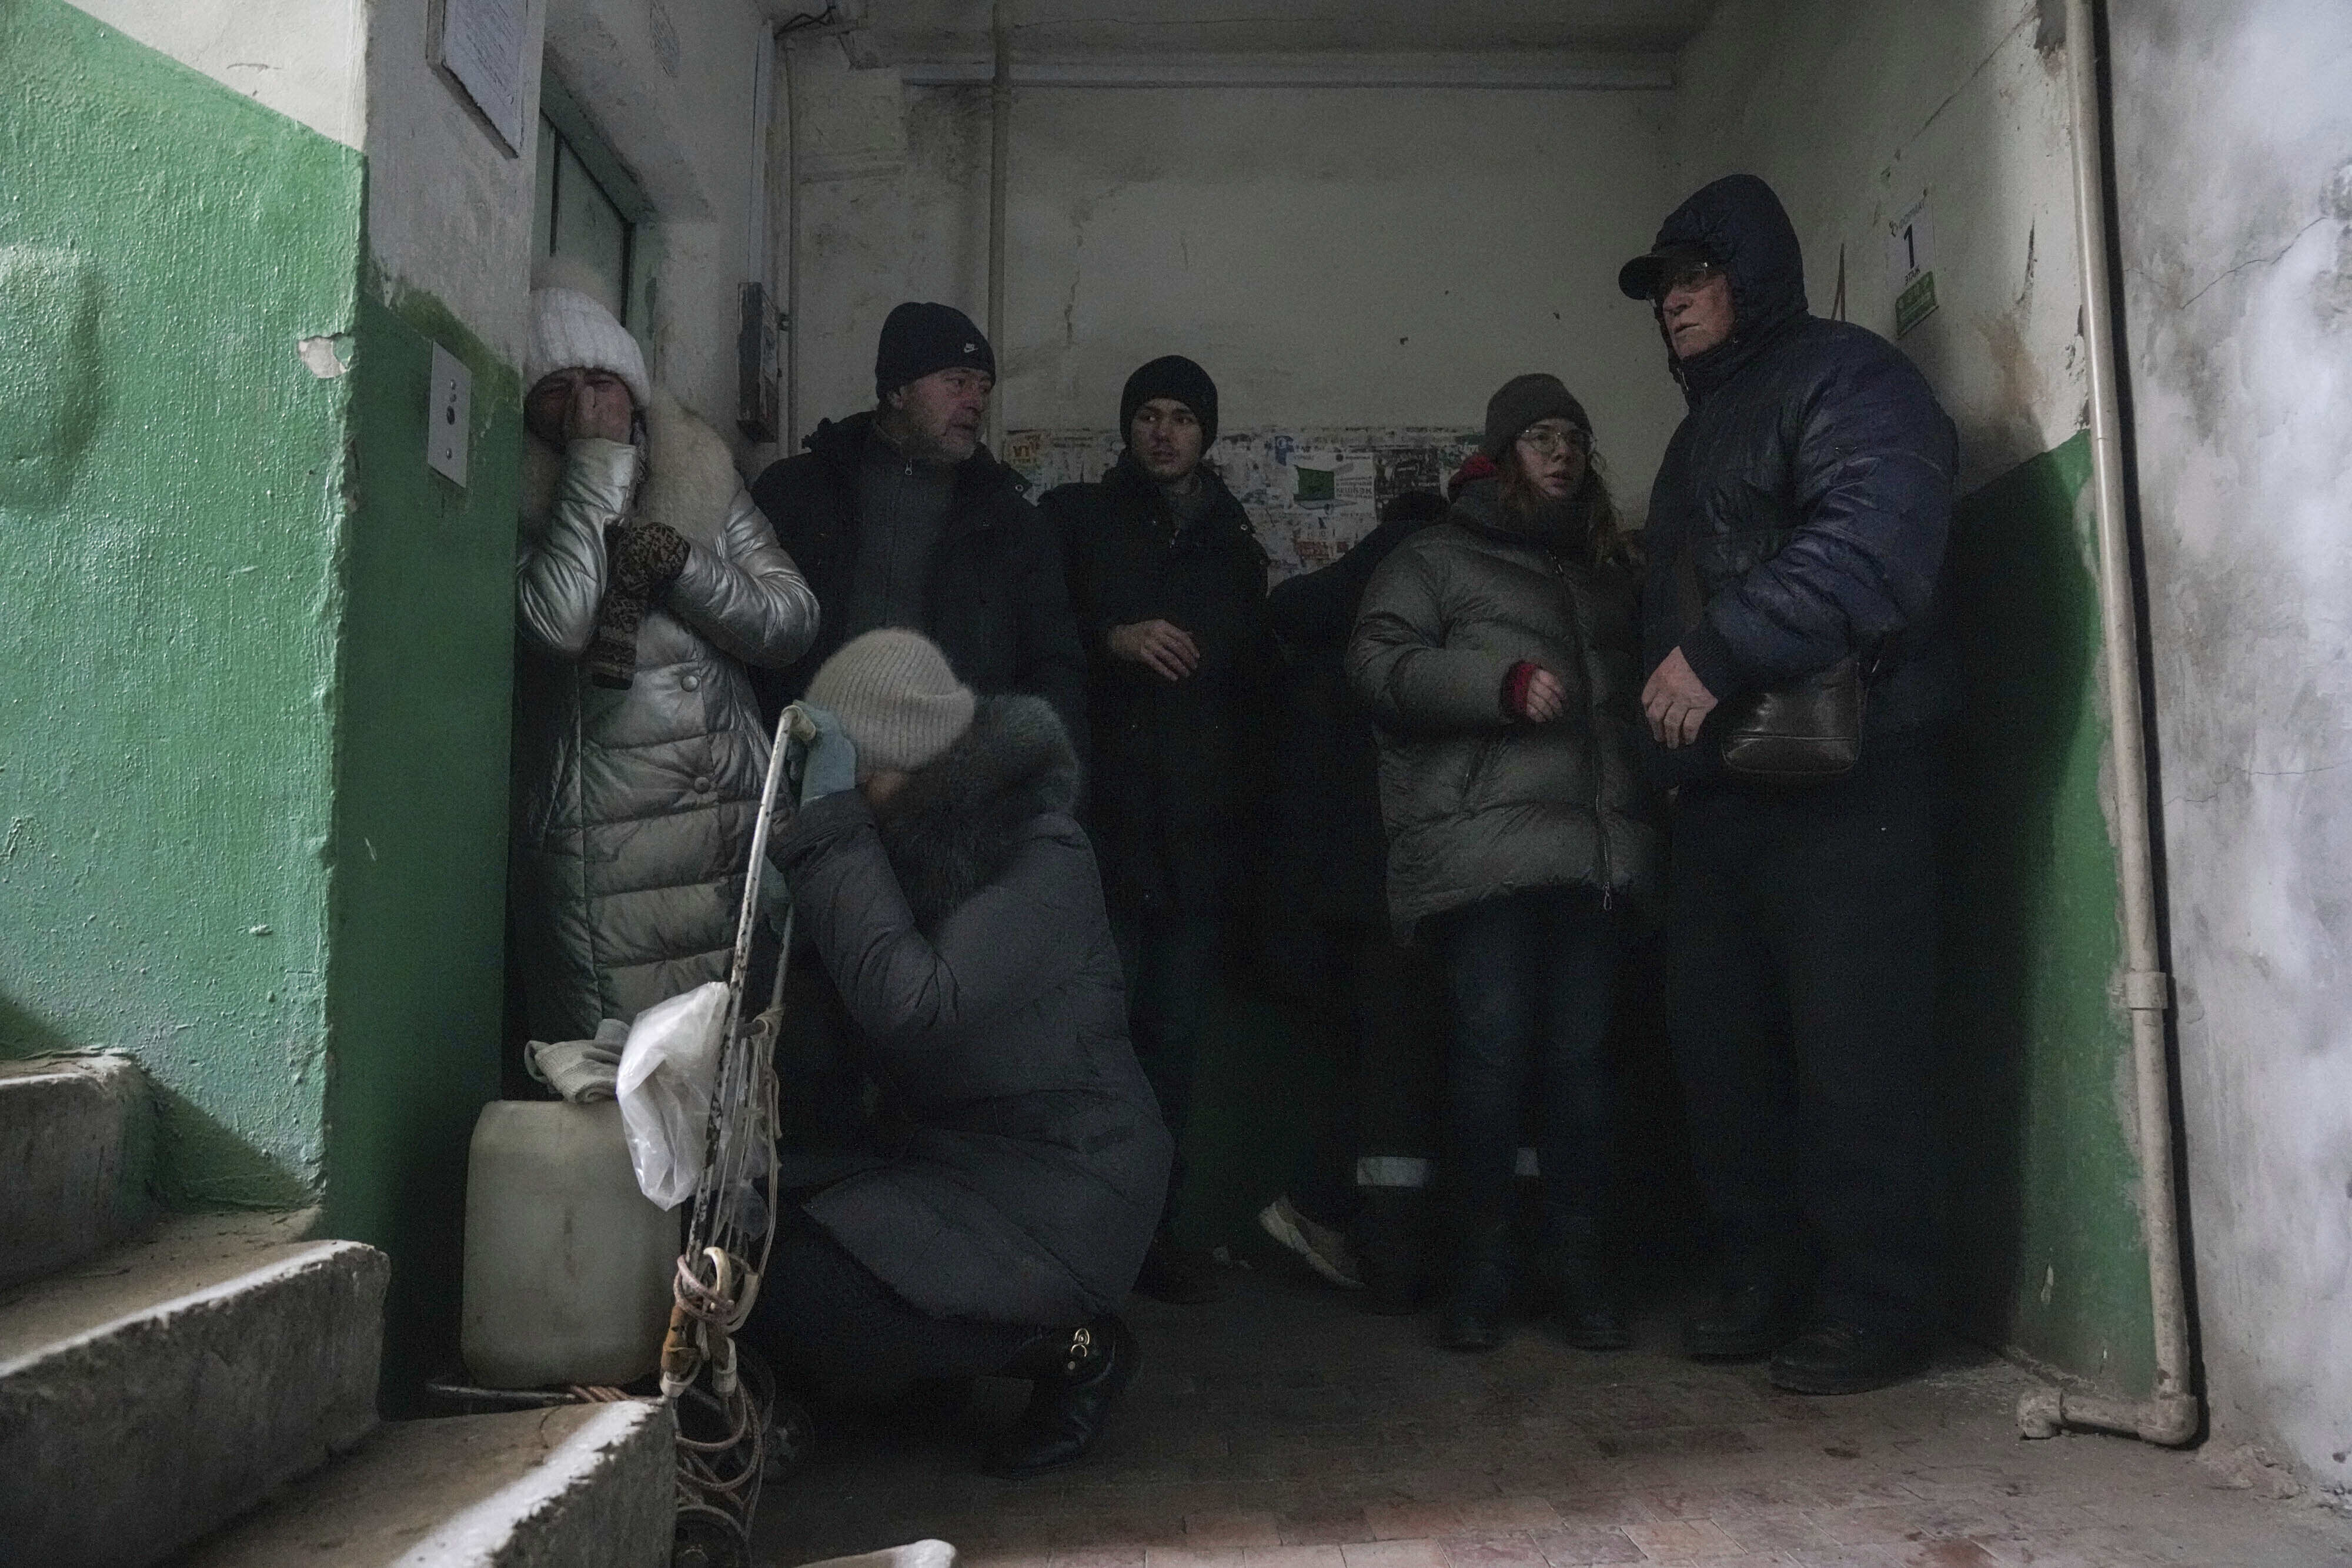 People take cover from shelling inside an entryway to an apartment building in Mariupol, Ukraine, on March 13.